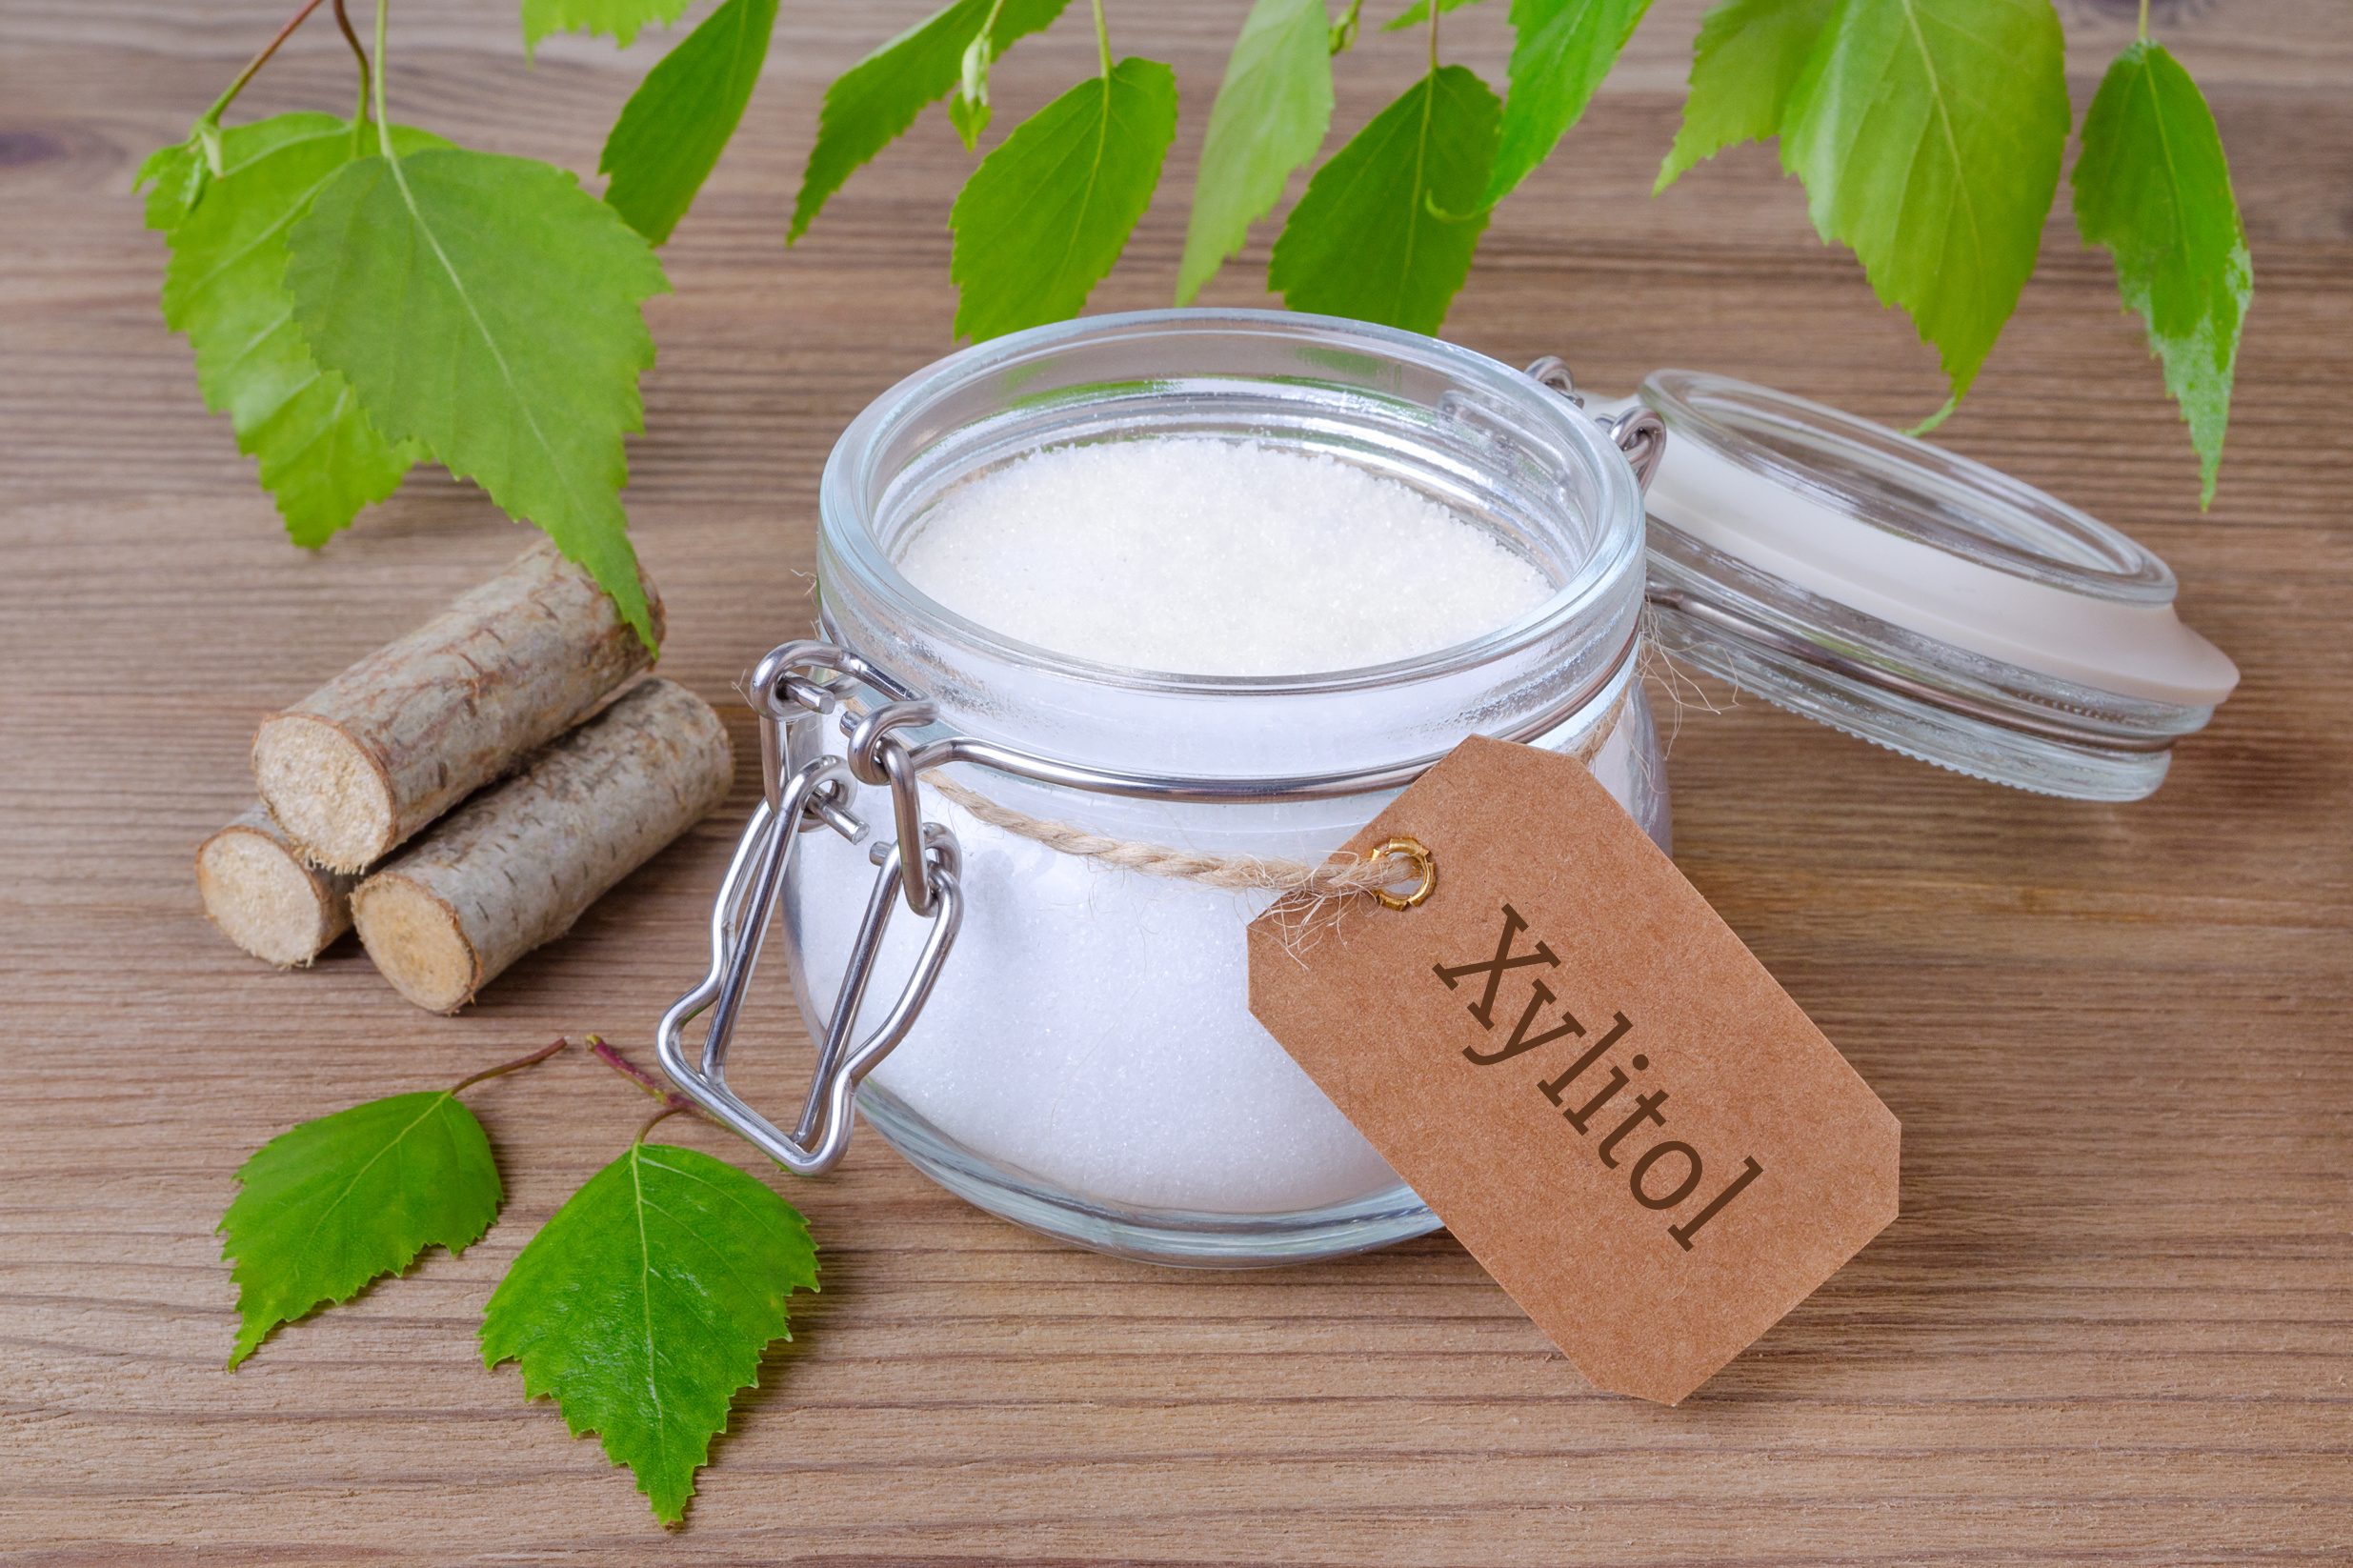 A jar of Xylitol - a low calorie sweetener